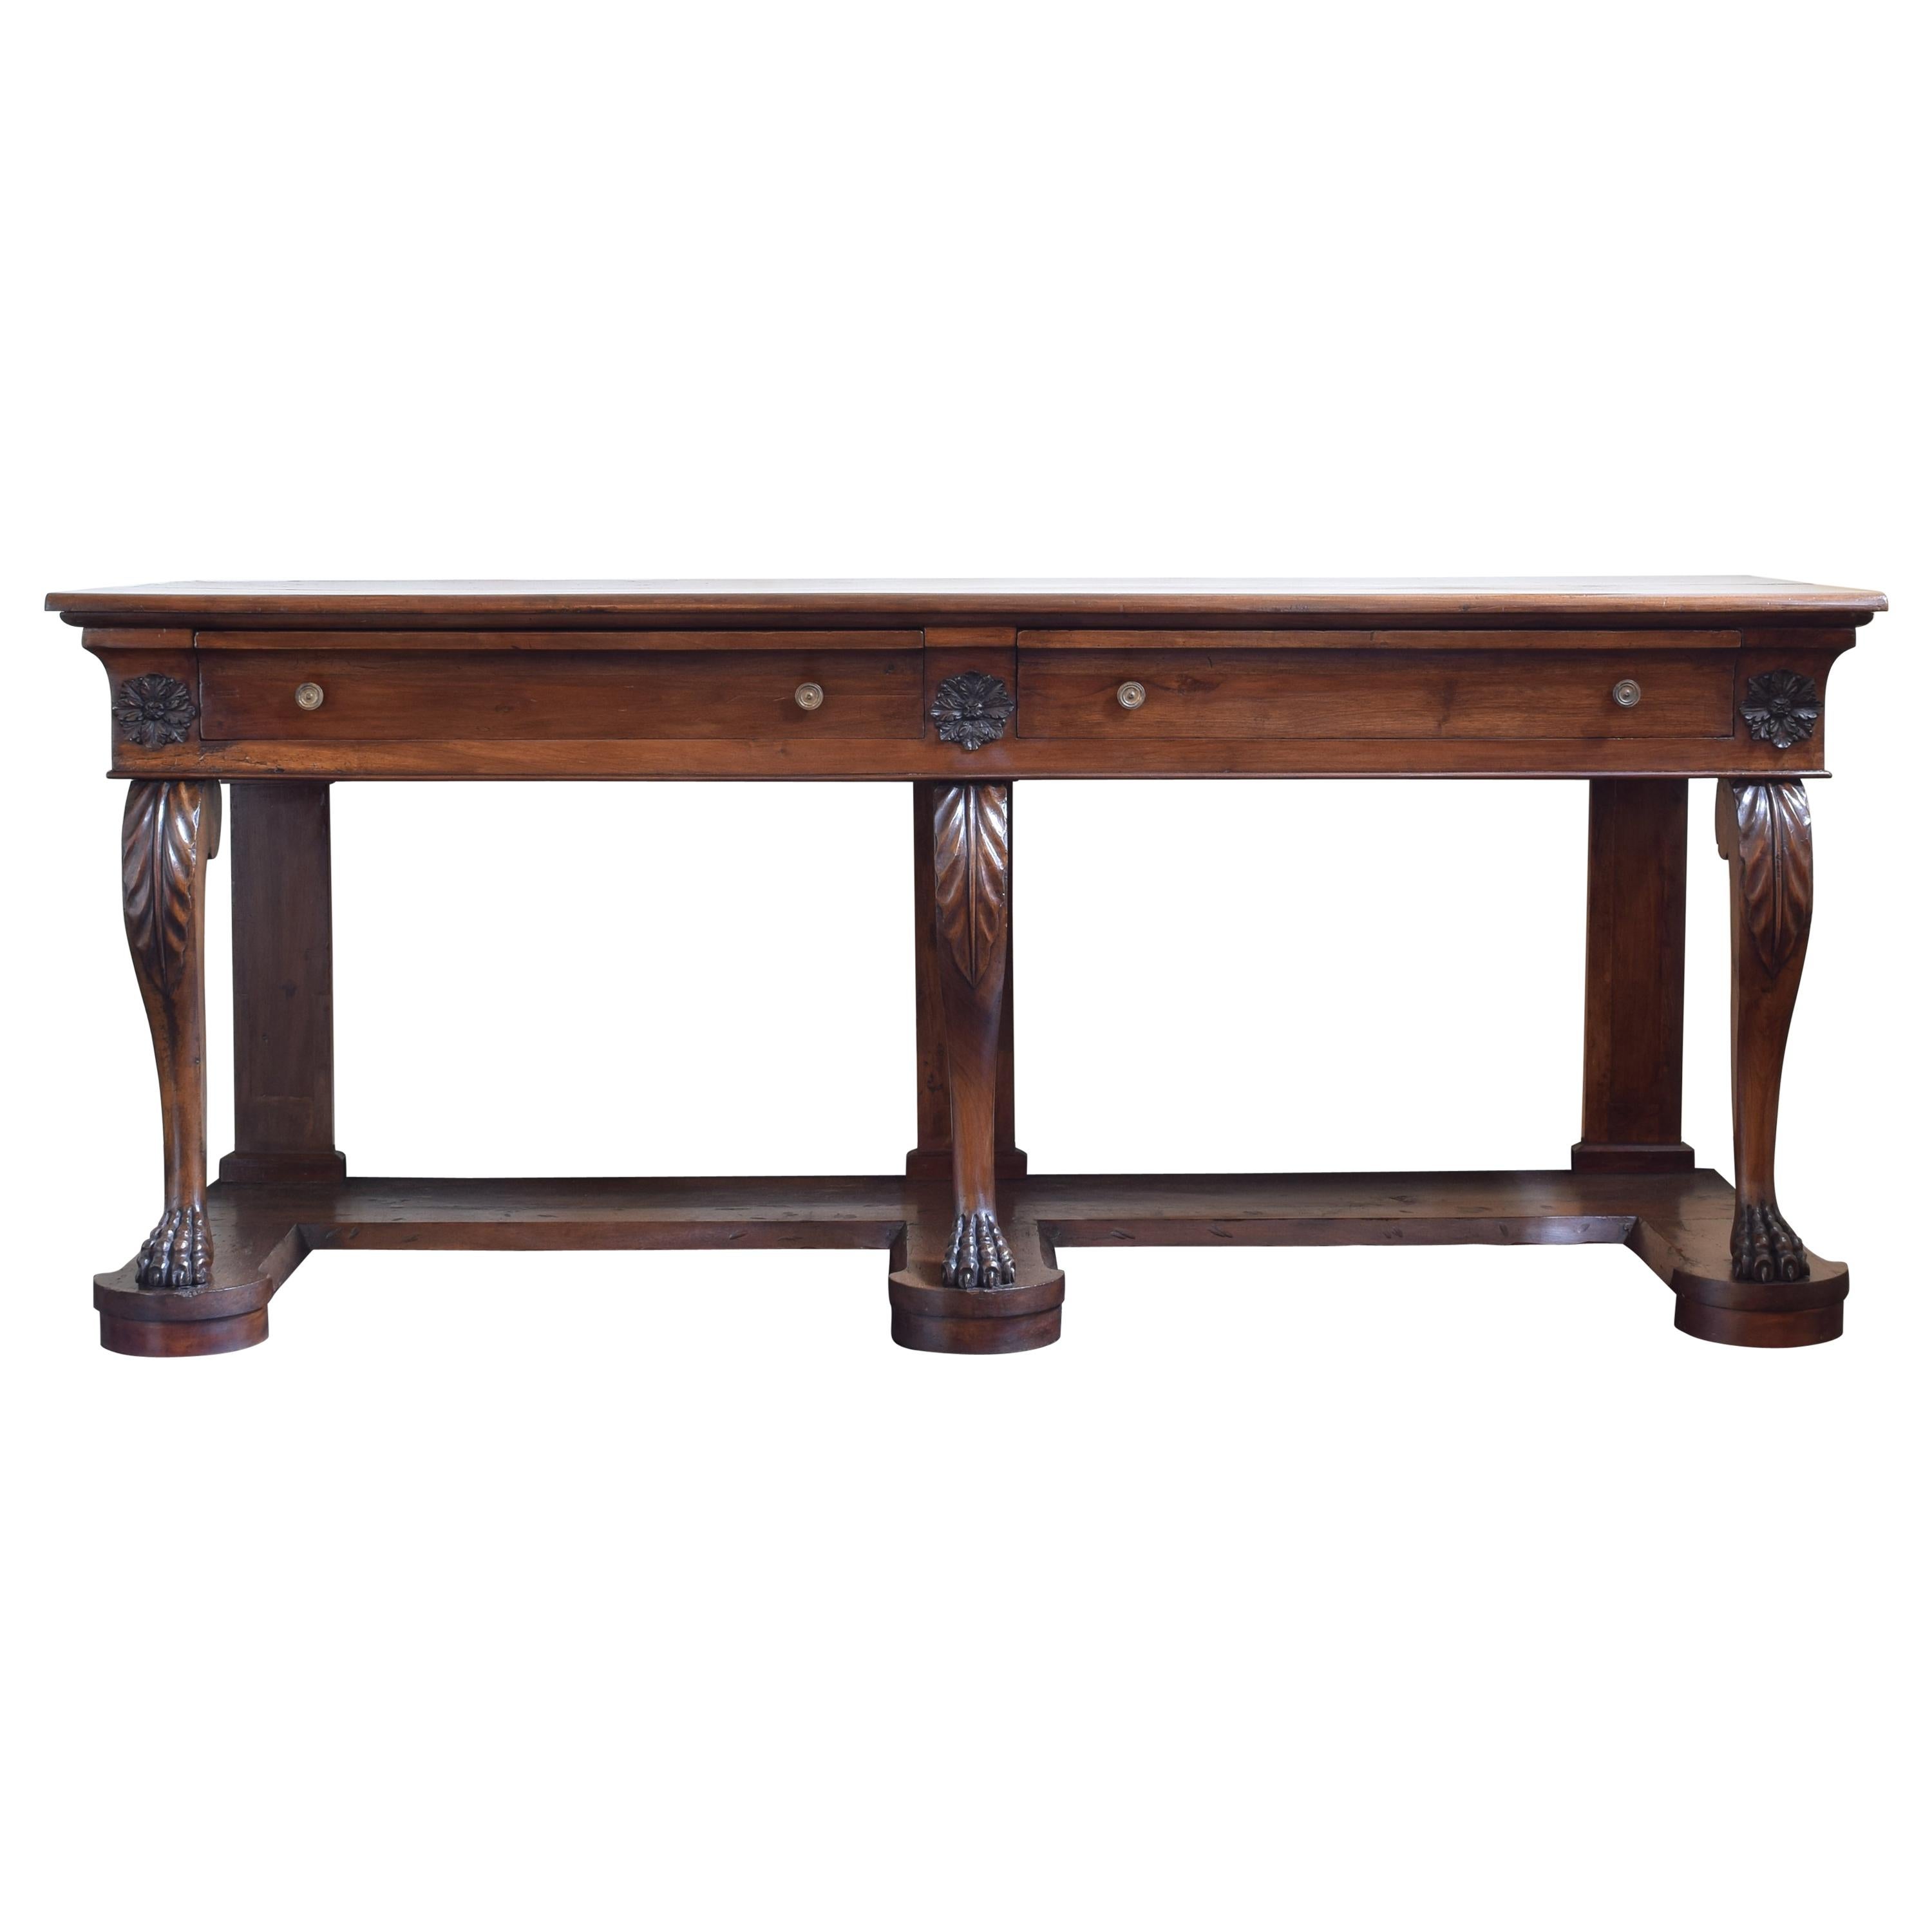 Large Late Neoclassical Carved Walnut Console Table, Italy, Mid-19th Century